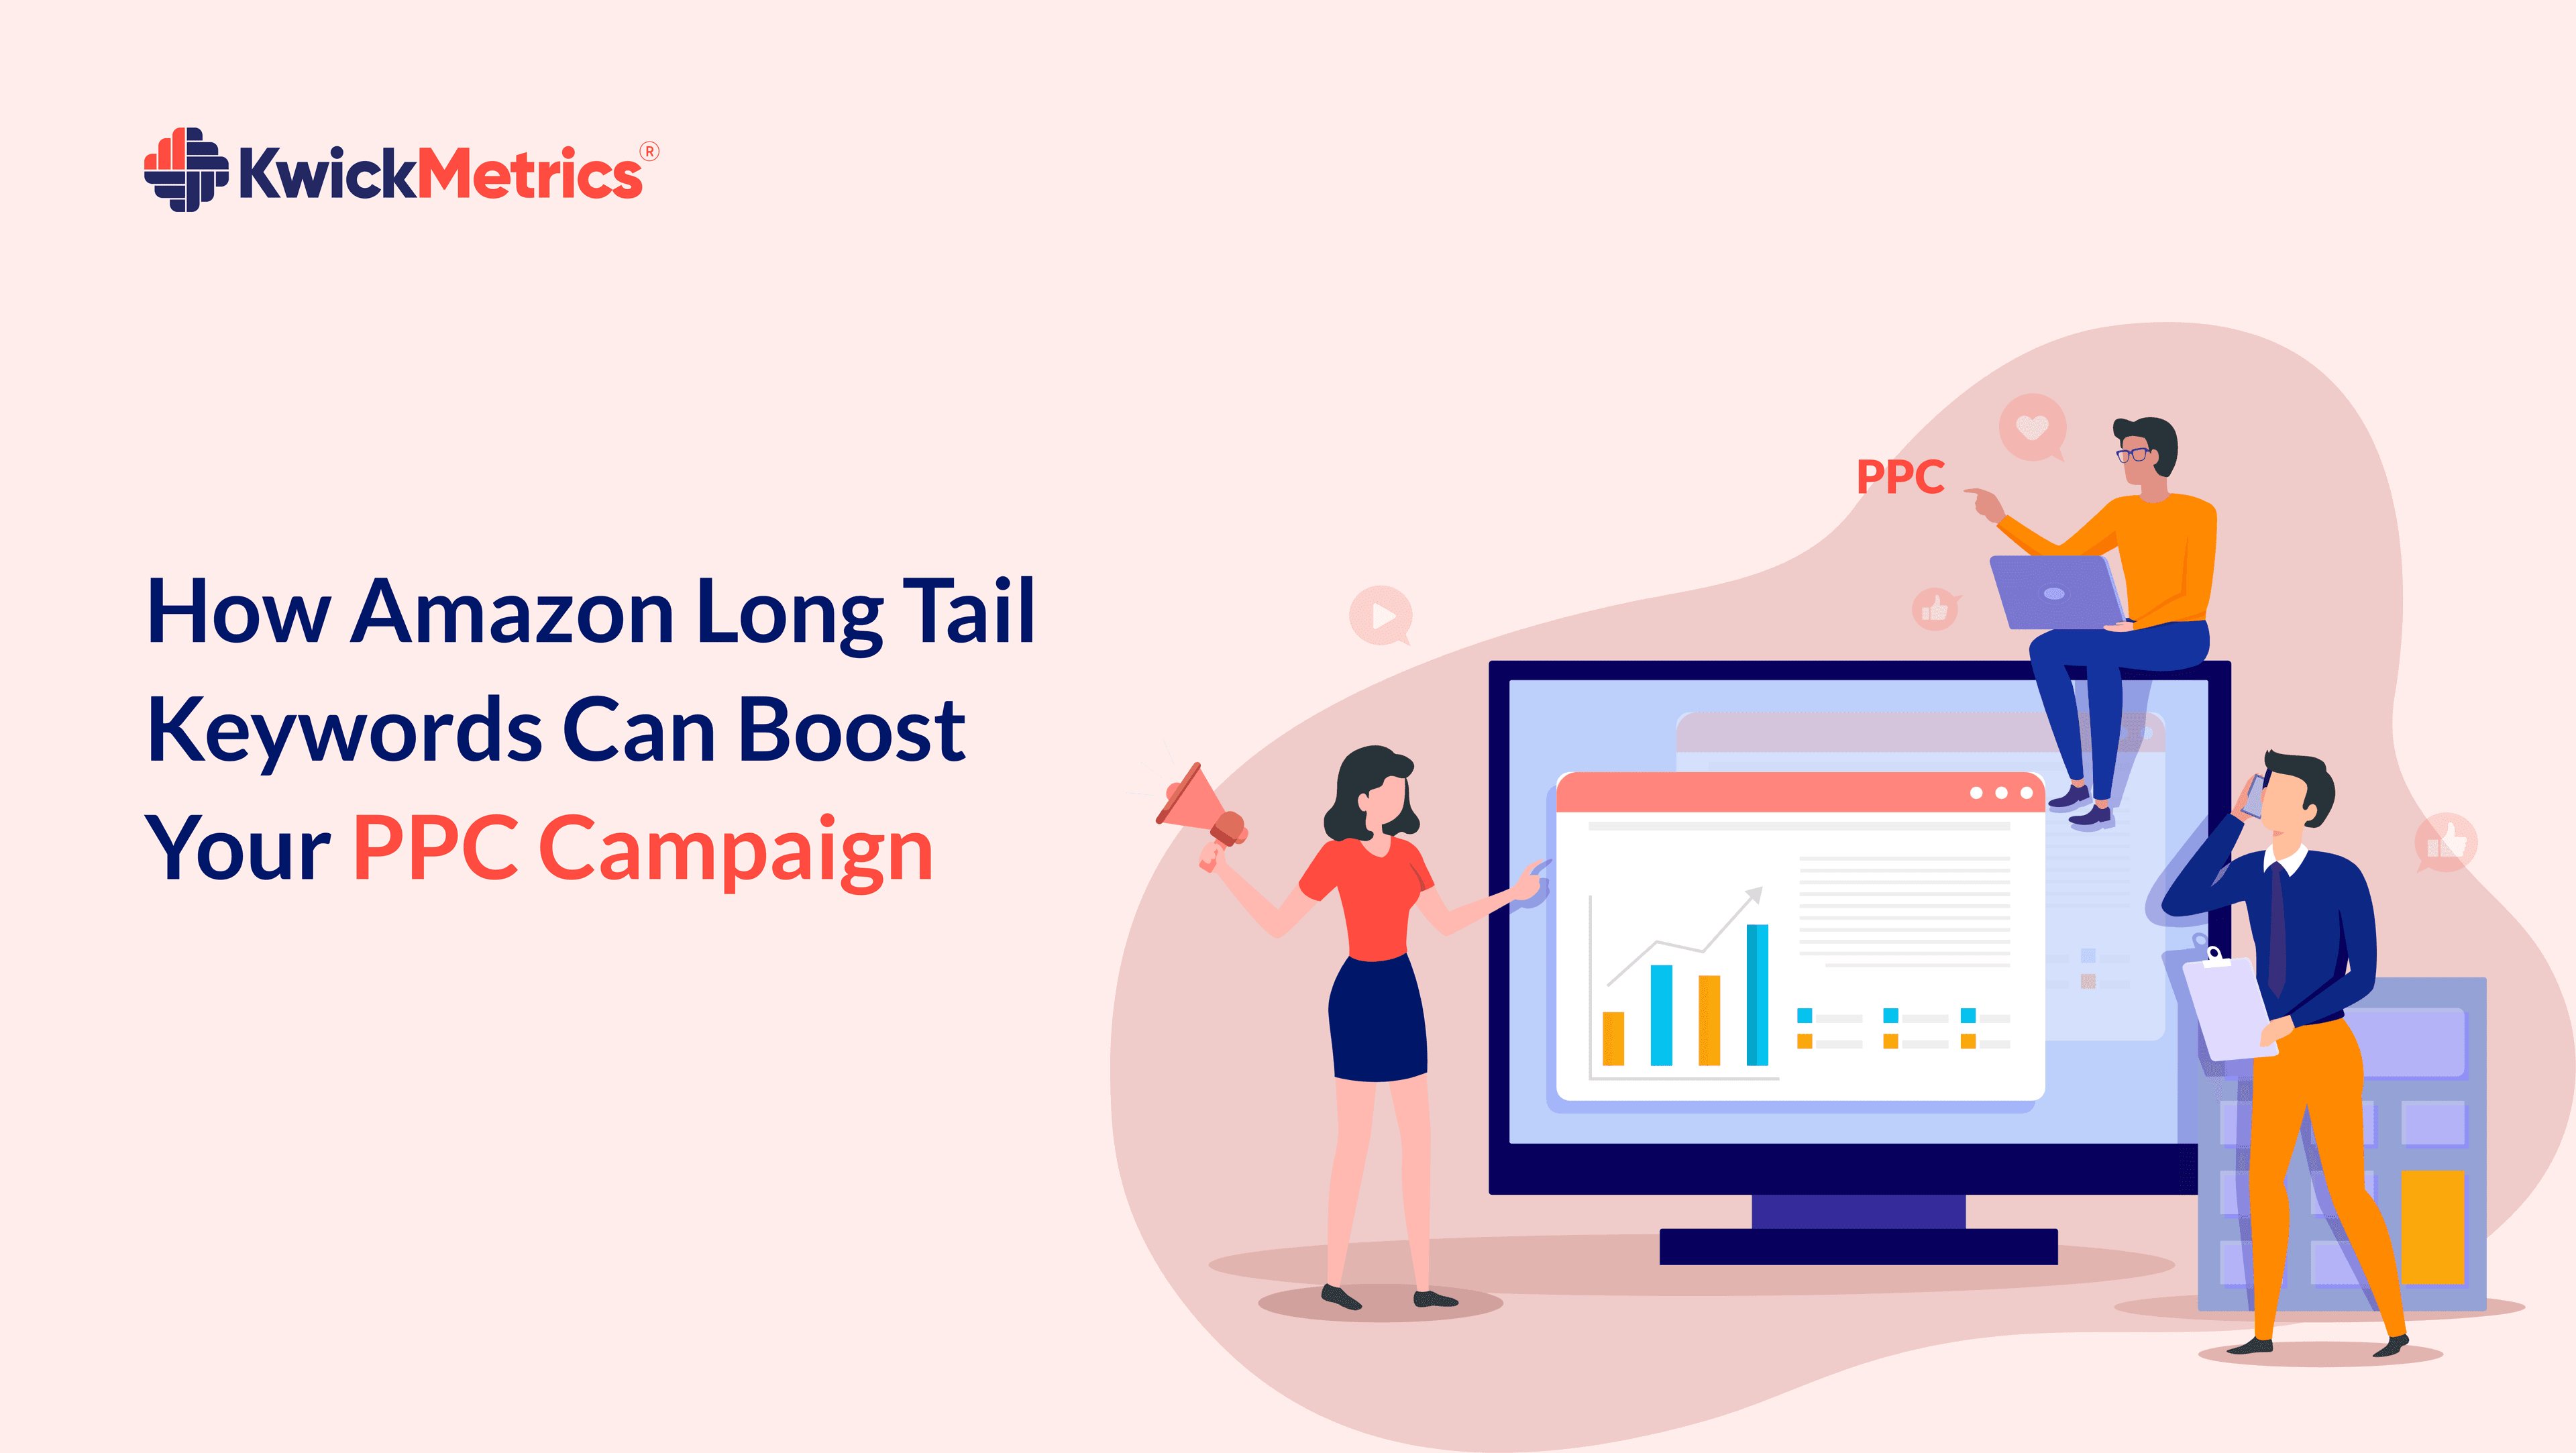 How Amazon Long Tail Keywords Can Boost Your PPC Campaign